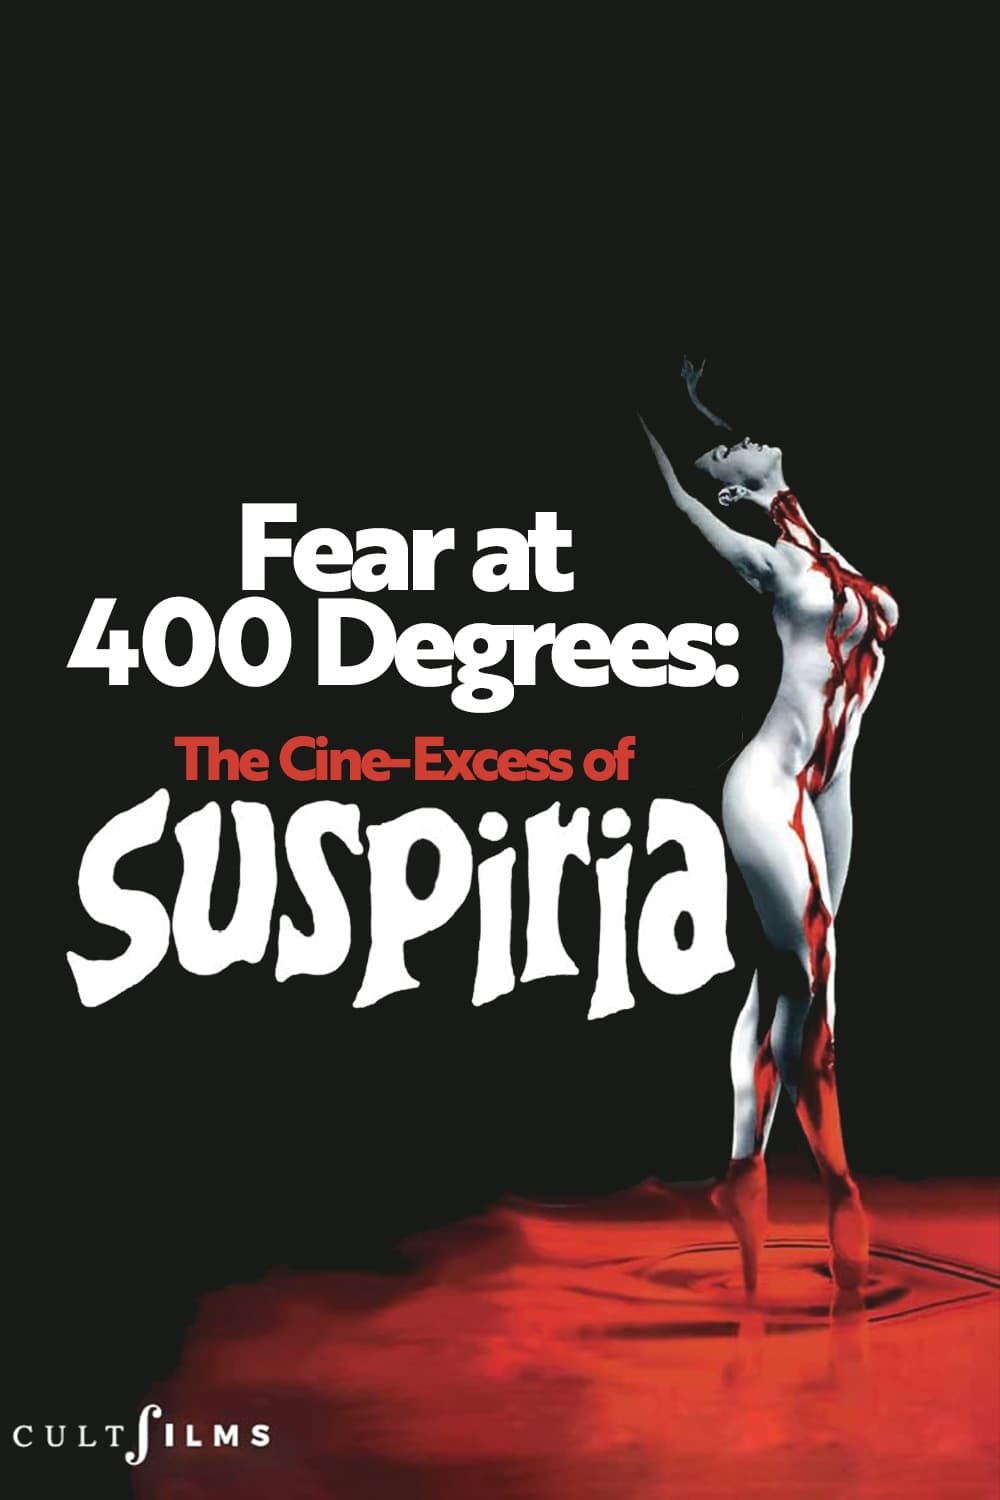 Fear at 400 Degrees: The Cine-Excess of Suspiria